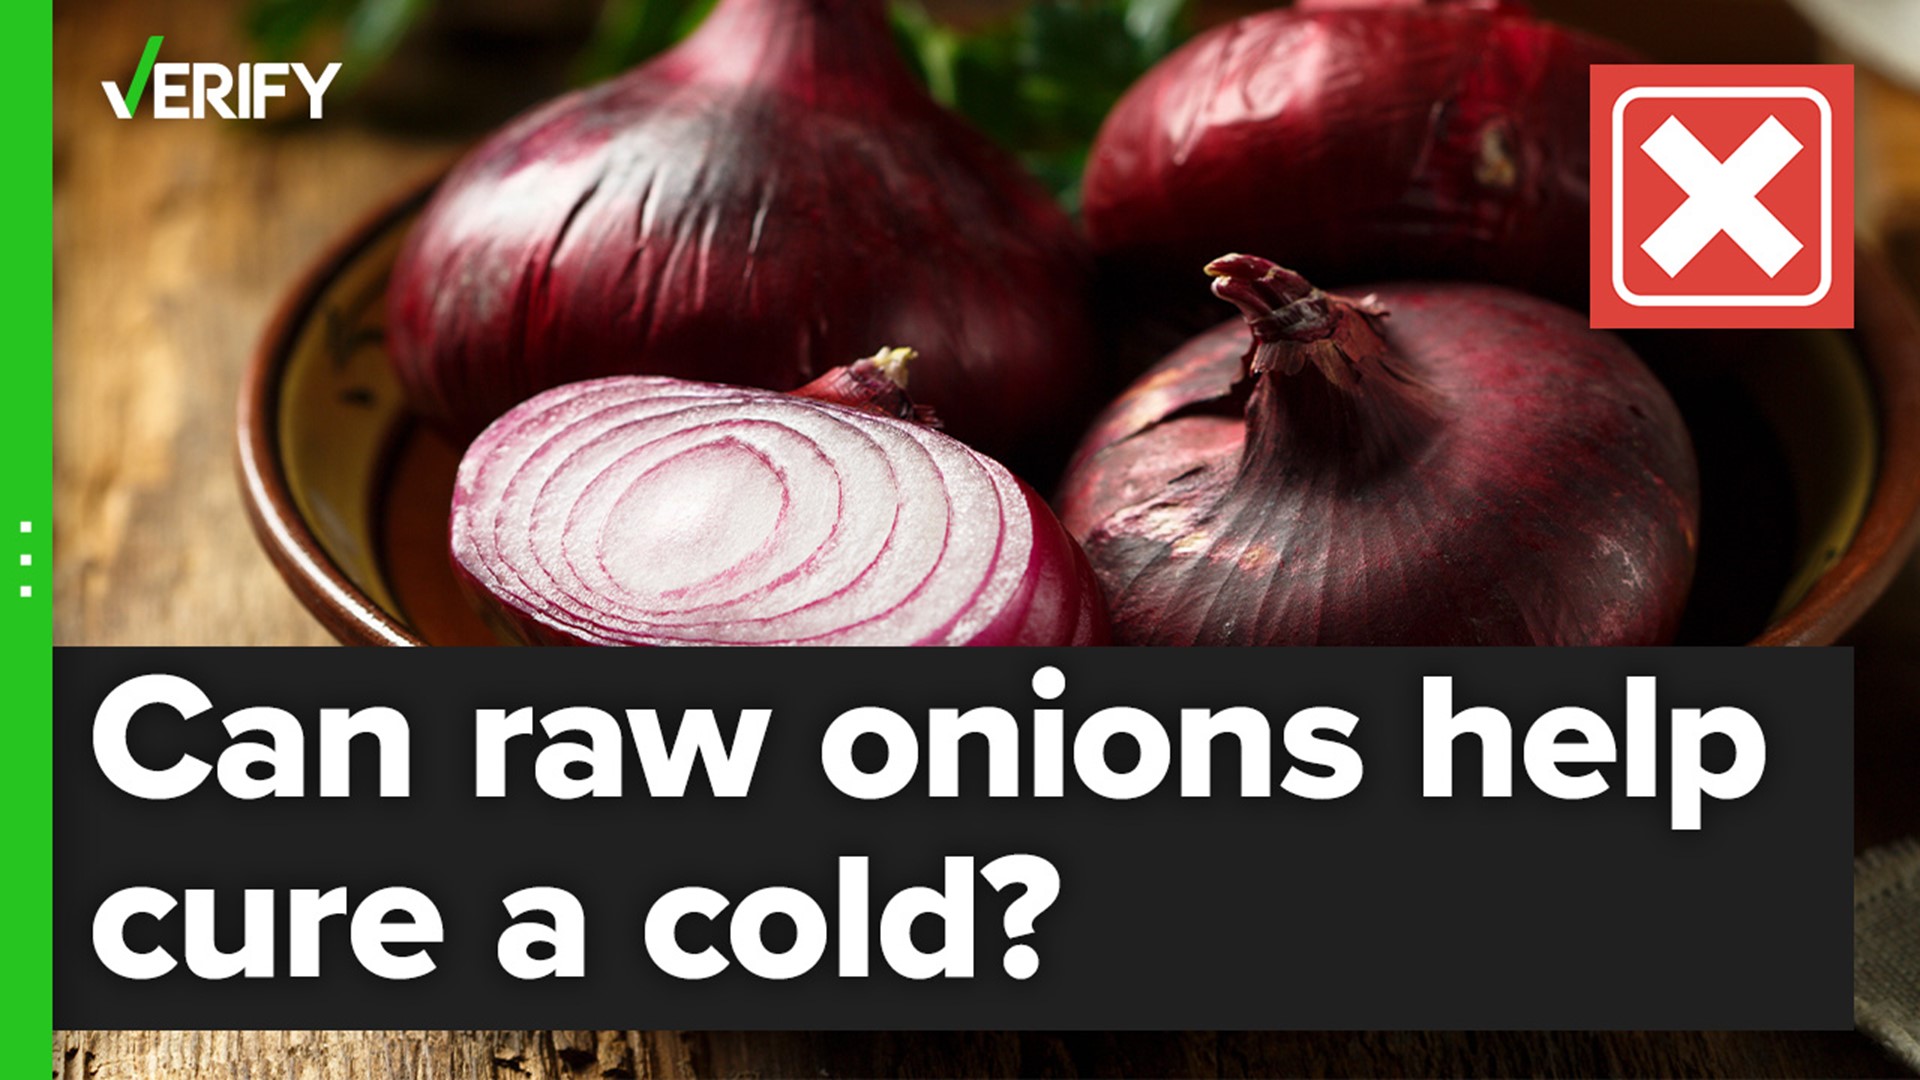 Onions do have important prebiotics that can strengthen the body's immune system, but you'd need to eat the onion.